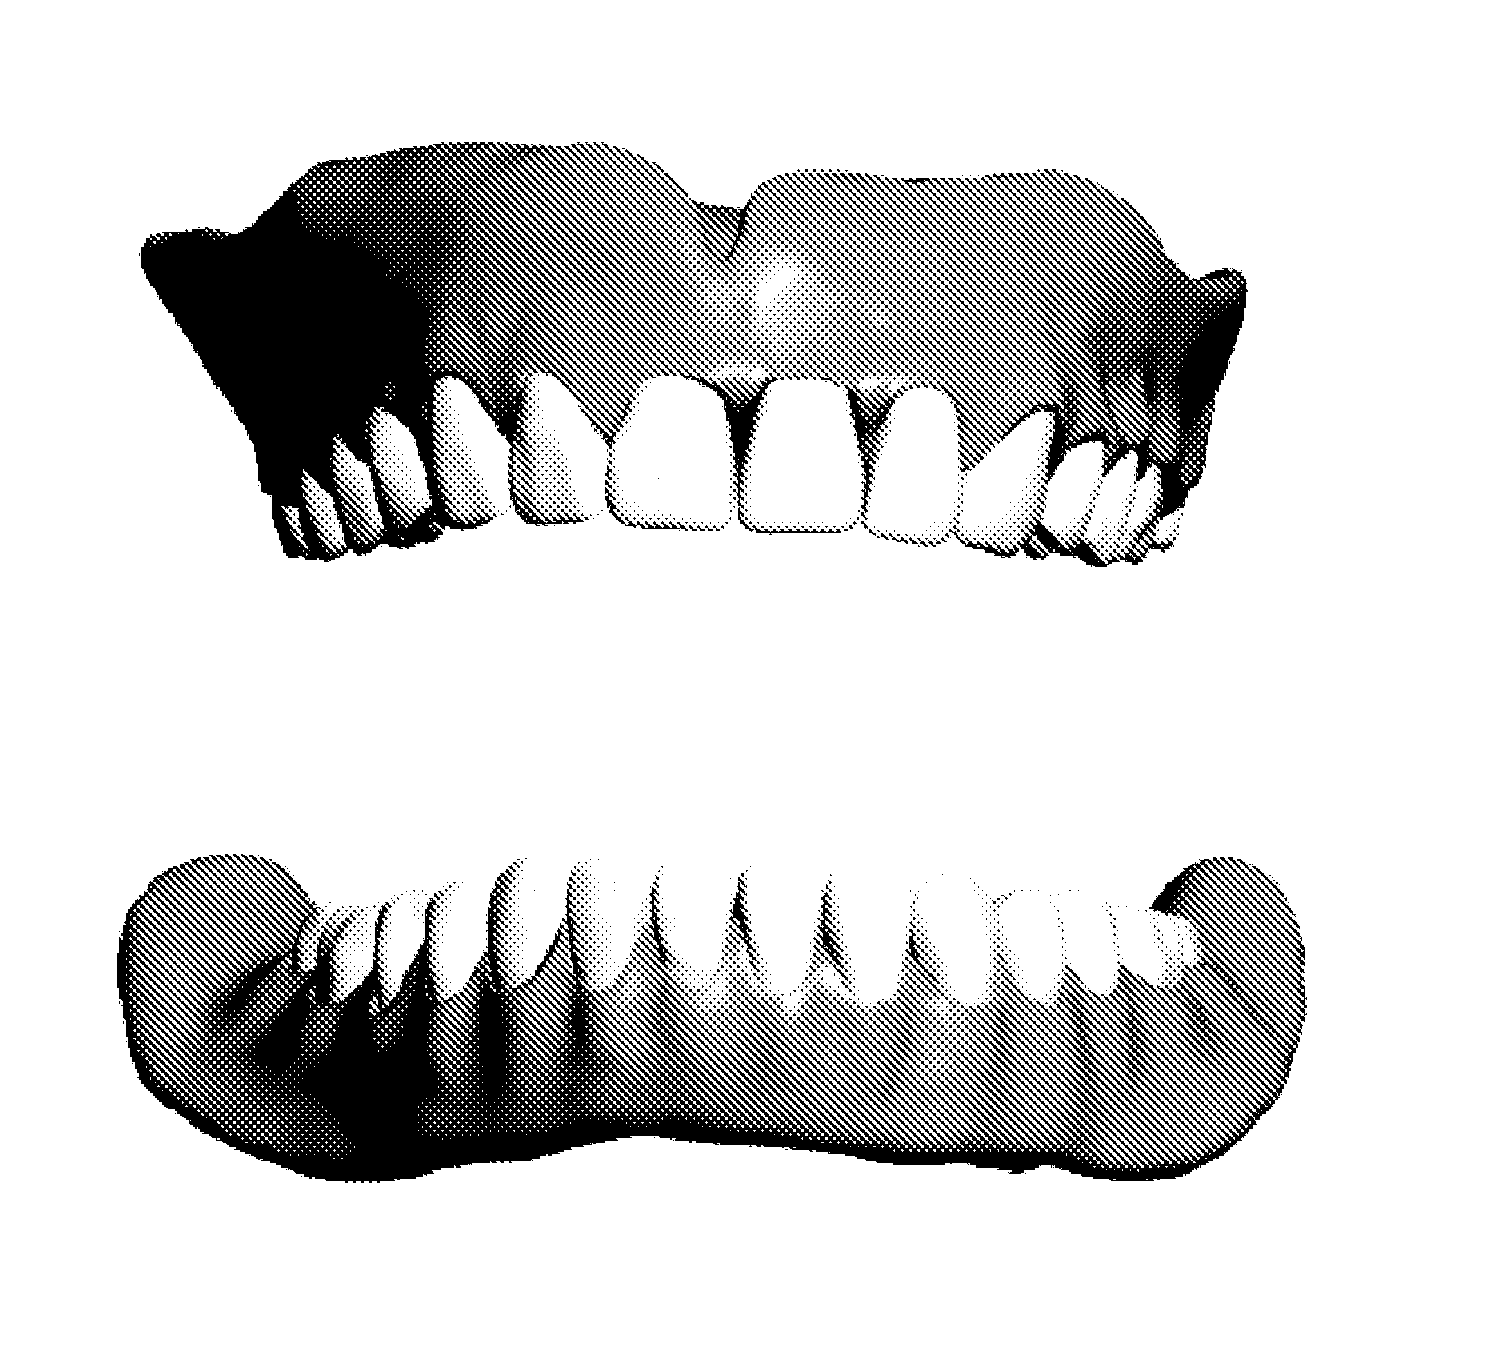 Photo-curable resin compositions and method of using the same in three-dimensional printing for manufacturing artificial teeth and denture base